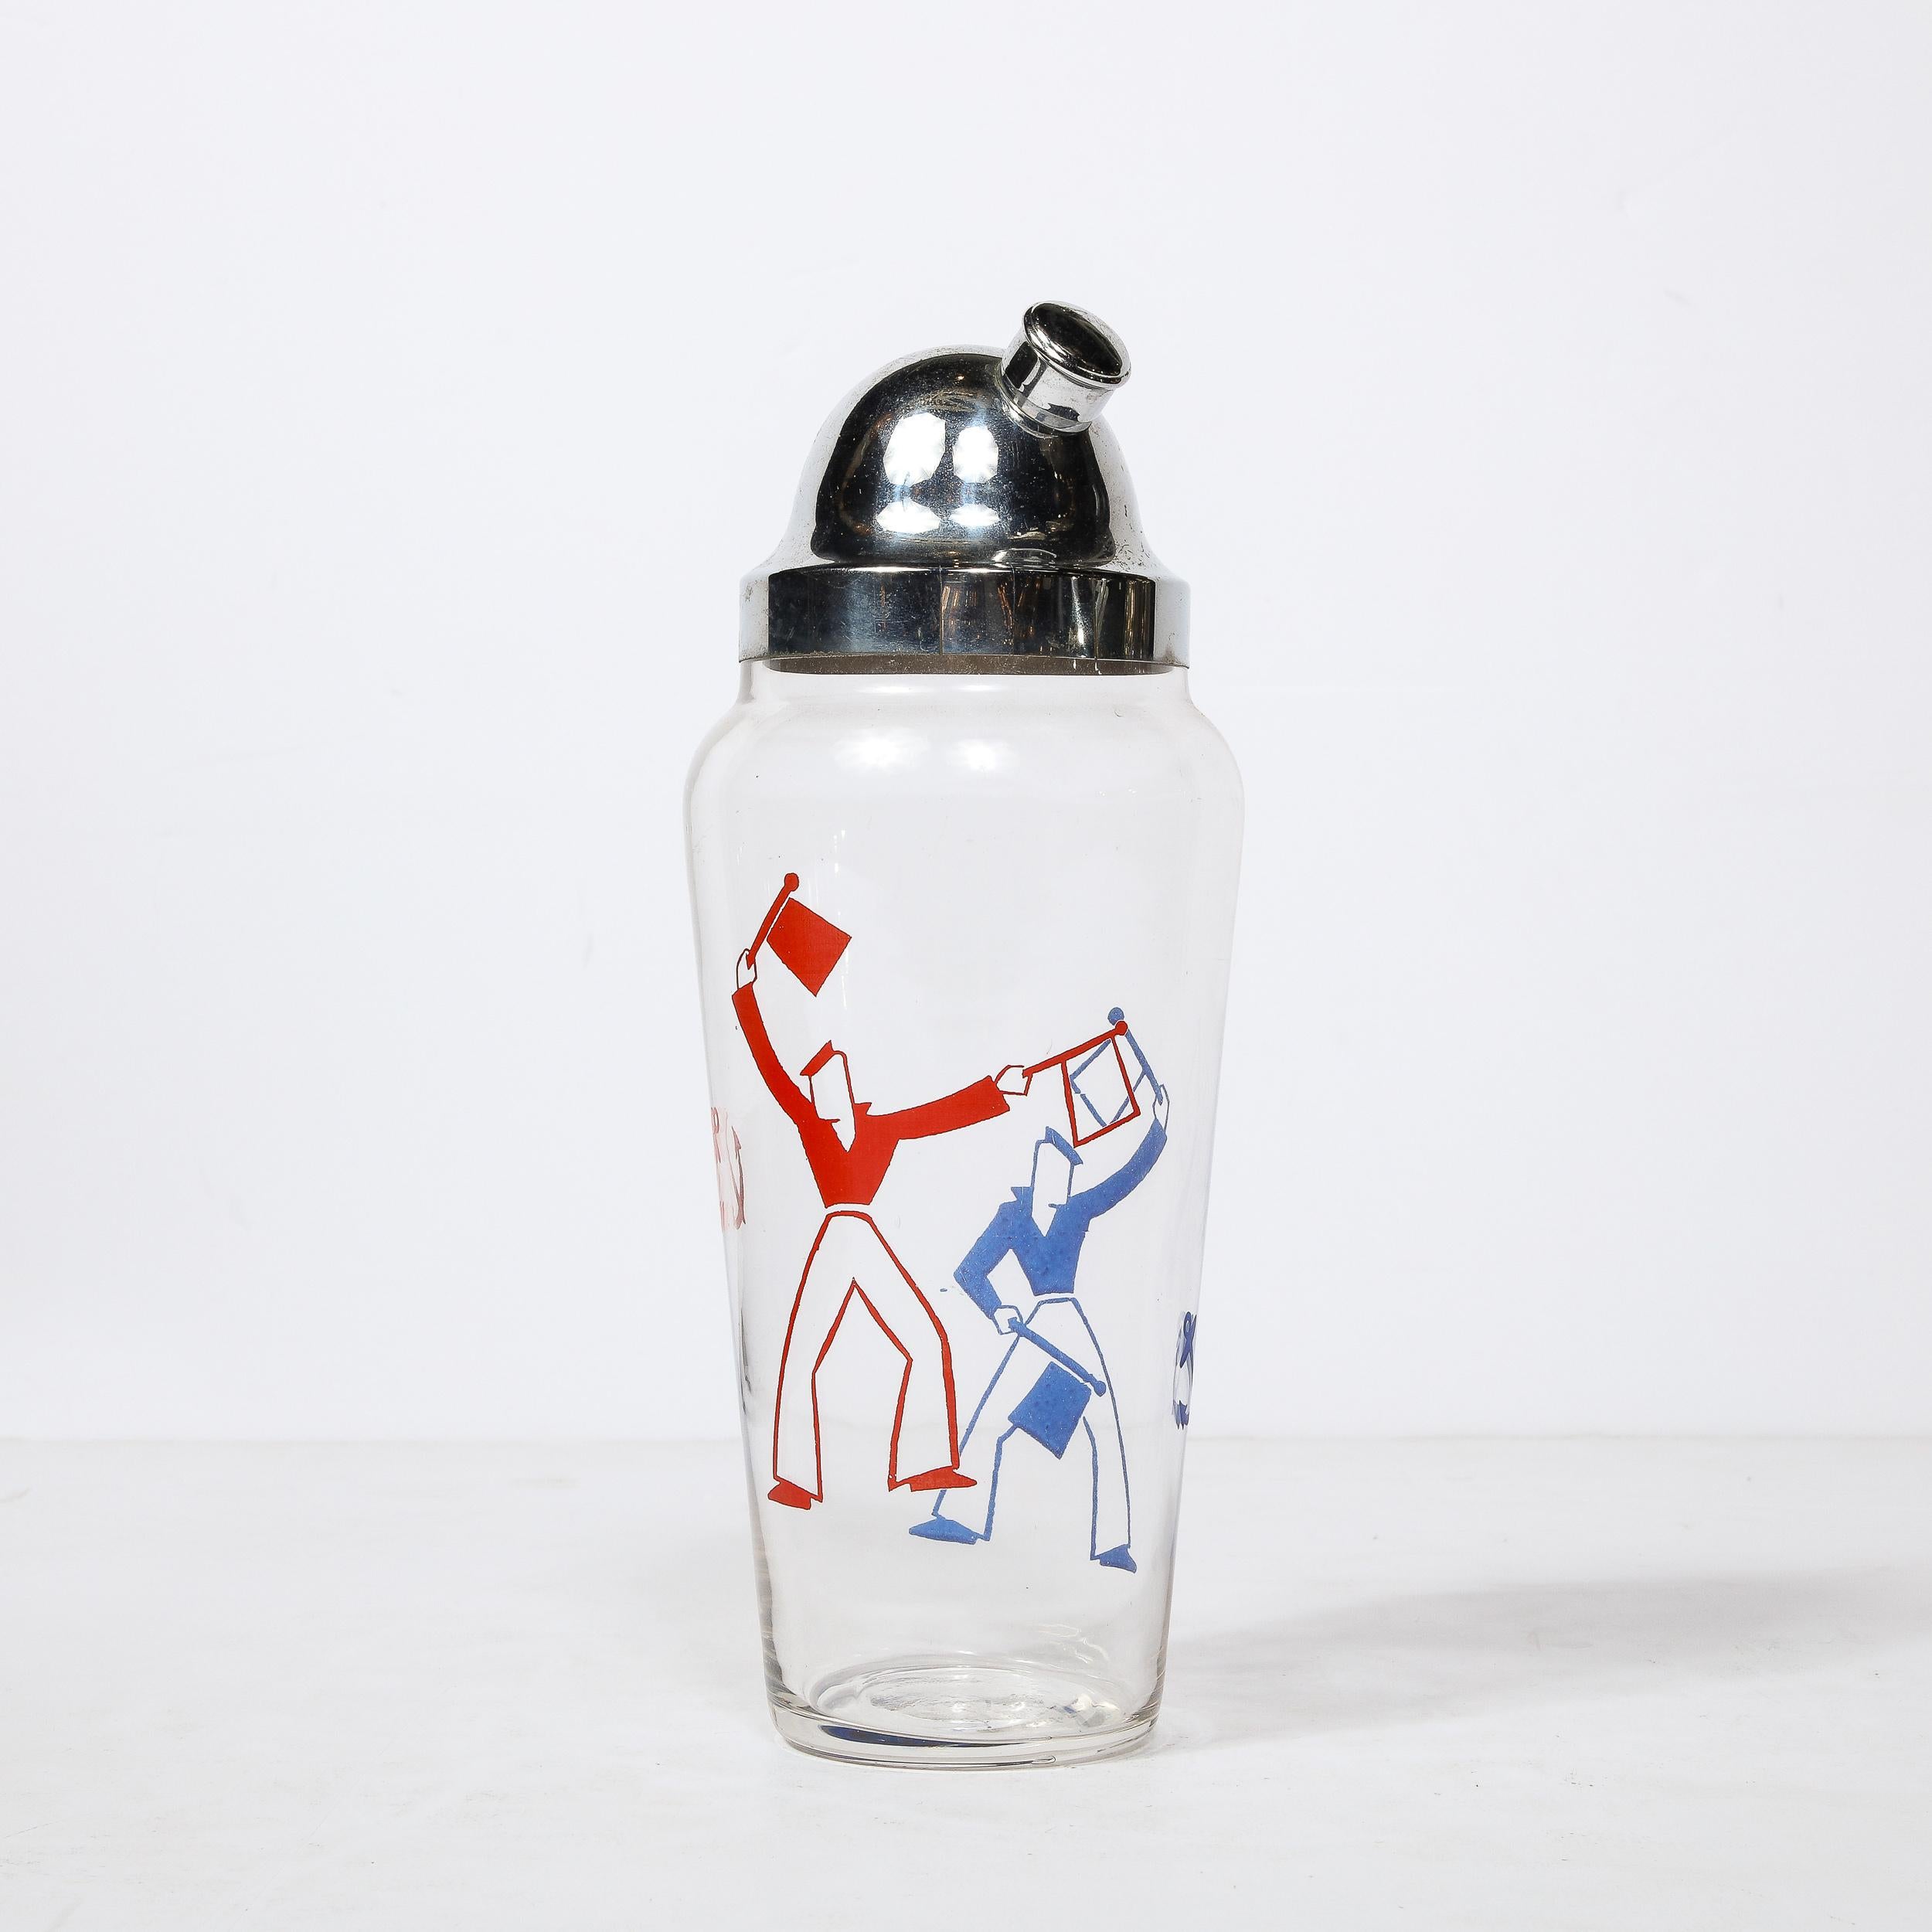 Art Deco Whimsical Cocktail Shaker in Chrome with Sailors in Red and Blue  5